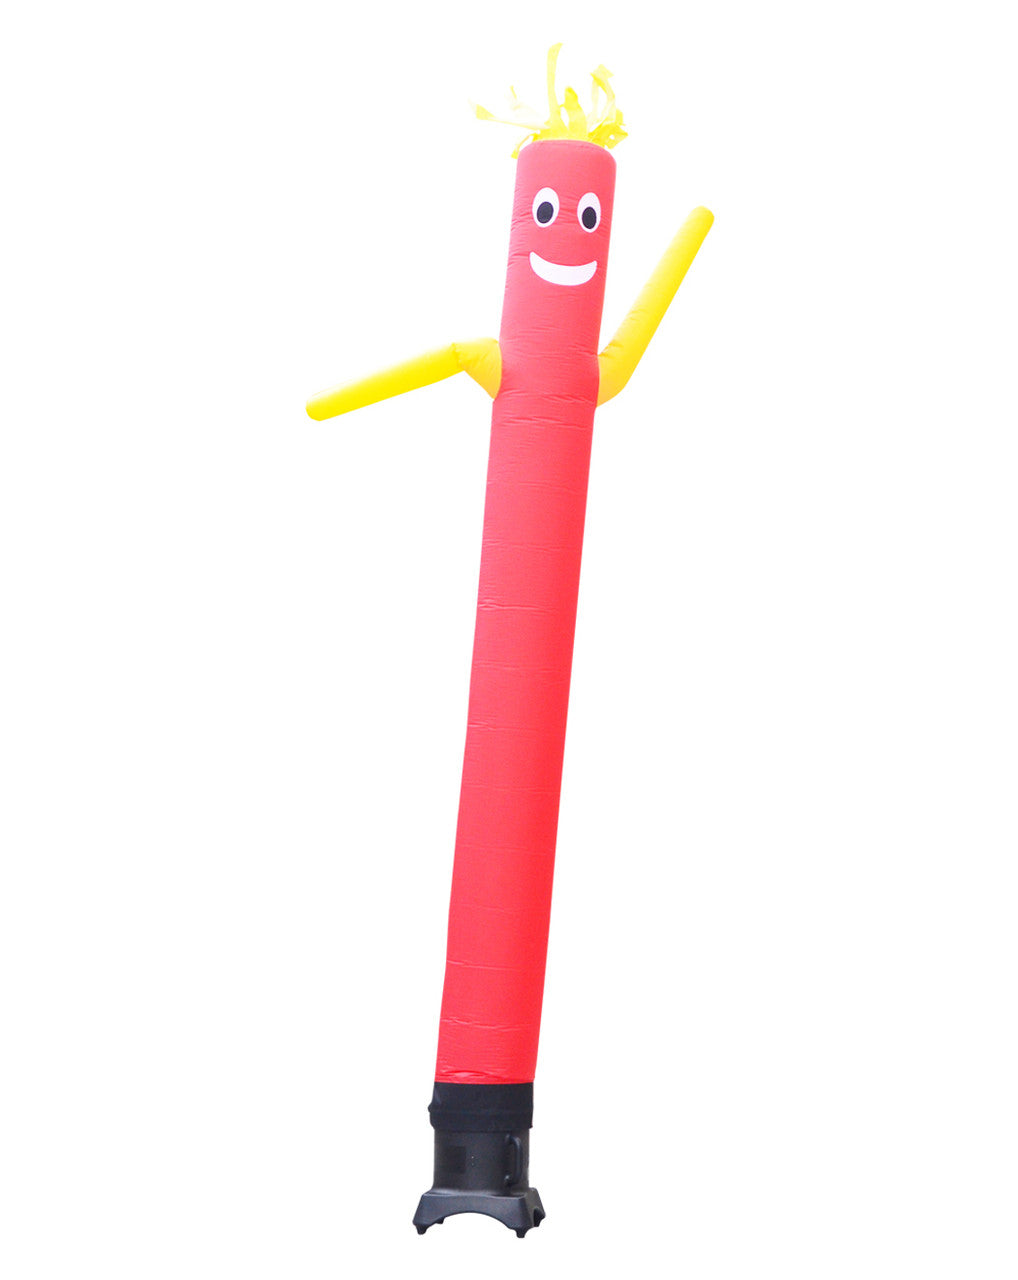 10ft Red Air Dancer with Yellow Arms Inflatable Wacky Wavy Tube Man